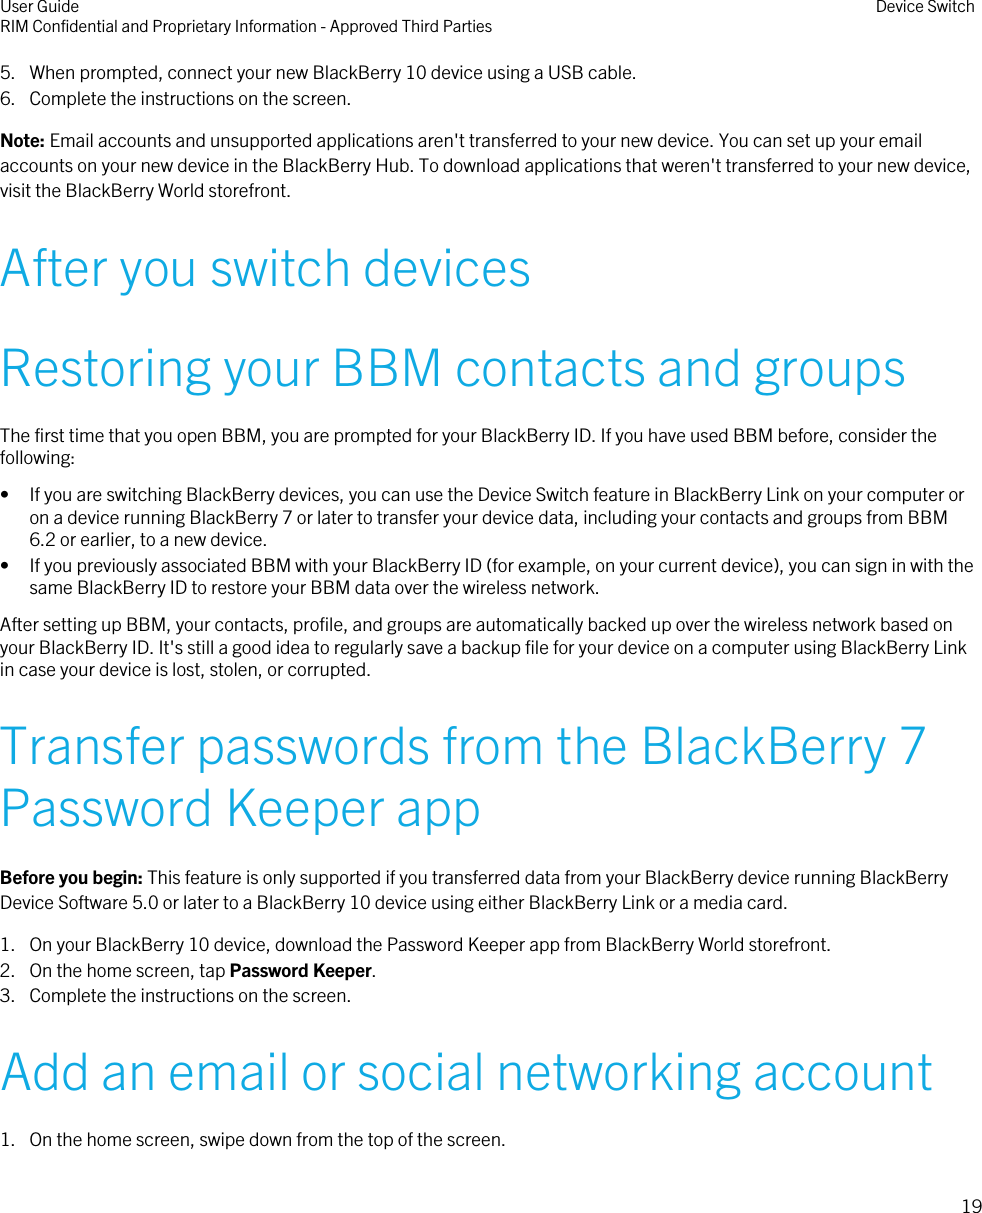 5. When prompted, connect your new BlackBerry 10 device using a USB cable.6. Complete the instructions on the screen.Note: Email accounts and unsupported applications aren&apos;t transferred to your new device. You can set up your emailaccounts on your new device in the BlackBerry Hub. To download applications that weren&apos;t transferred to your new device,visit the BlackBerry World storefront.After you switch devicesRestoring your BBM contacts and groupsThe first time that you open BBM, you are prompted for your BlackBerry ID. If you have used BBM before, consider thefollowing:• If you are switching BlackBerry devices, you can use the Device Switch feature in BlackBerry Link on your computer oron a device running BlackBerry 7 or later to transfer your device data, including your contacts and groups from BBM6.2 or earlier, to a new device.• If you previously associated BBM with your BlackBerry ID (for example, on your current device), you can sign in with thesame BlackBerry ID to restore your BBM data over the wireless network.After setting up BBM, your contacts, profile, and groups are automatically backed up over the wireless network based onyour BlackBerry ID. It&apos;s still a good idea to regularly save a backup file for your device on a computer using BlackBerry Linkin case your device is lost, stolen, or corrupted.Transfer passwords from the BlackBerry 7Password Keeper appBefore you begin: This feature is only supported if you transferred data from your BlackBerry device running BlackBerryDevice Software 5.0 or later to a BlackBerry 10 device using either BlackBerry Link or a media card.1. On your BlackBerry 10 device, download the Password Keeper app from BlackBerry World storefront.2. On the home screen, tap Password Keeper.3. Complete the instructions on the screen.Add an email or social networking account1. On the home screen, swipe down from the top of the screen.User GuideRIM Confidential and Proprietary Information - Approved Third Parties Device Switch19